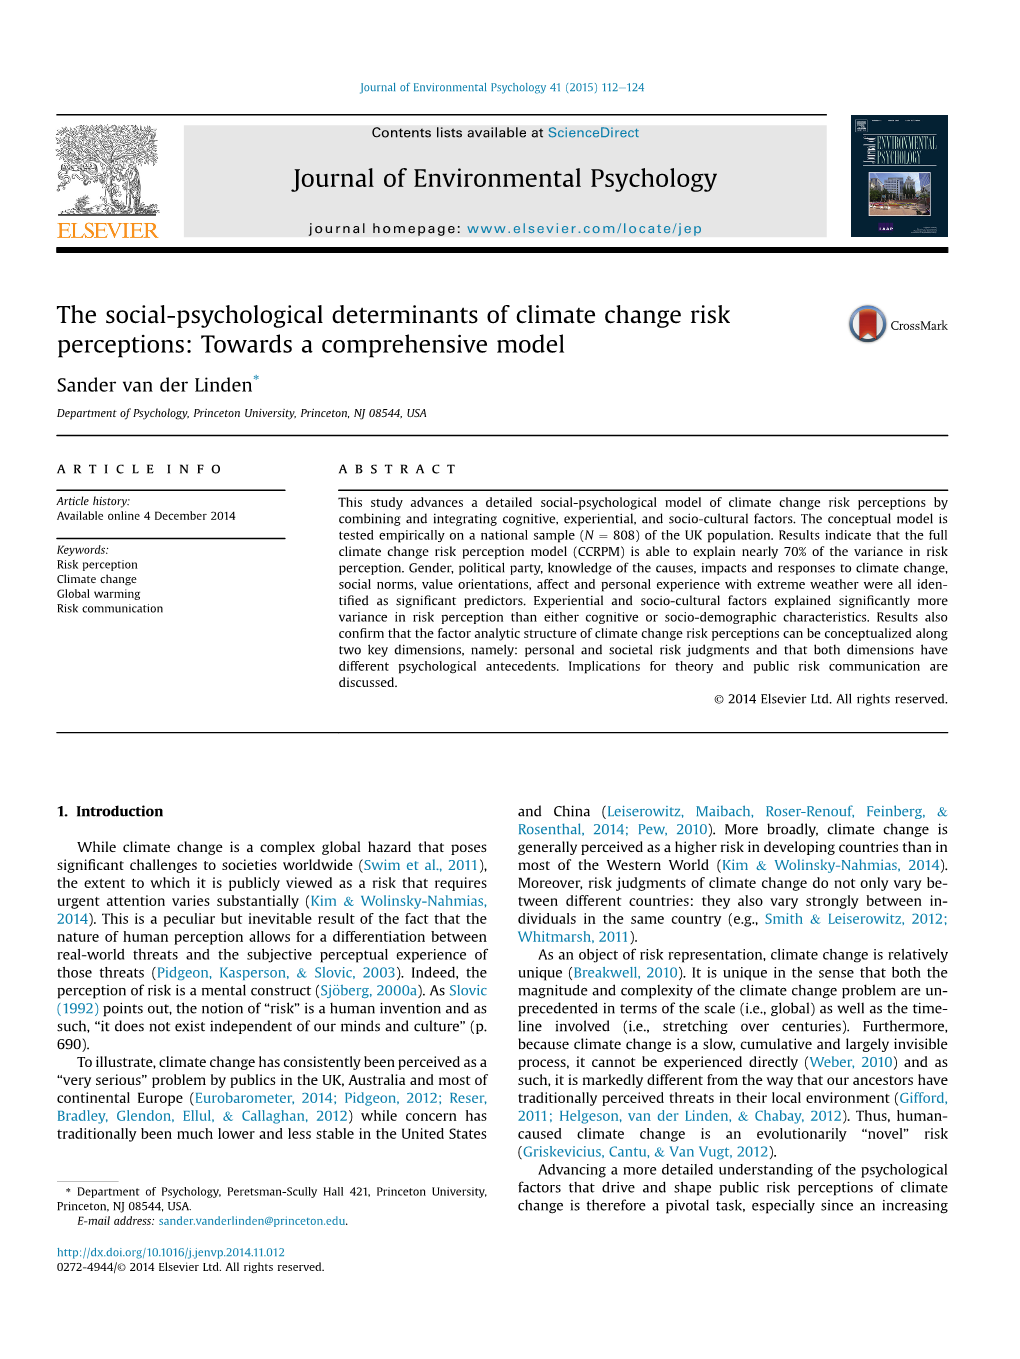 The Social-Psychological Determinants of Climate Change Risk Perceptions: Towards a Comprehensive Model